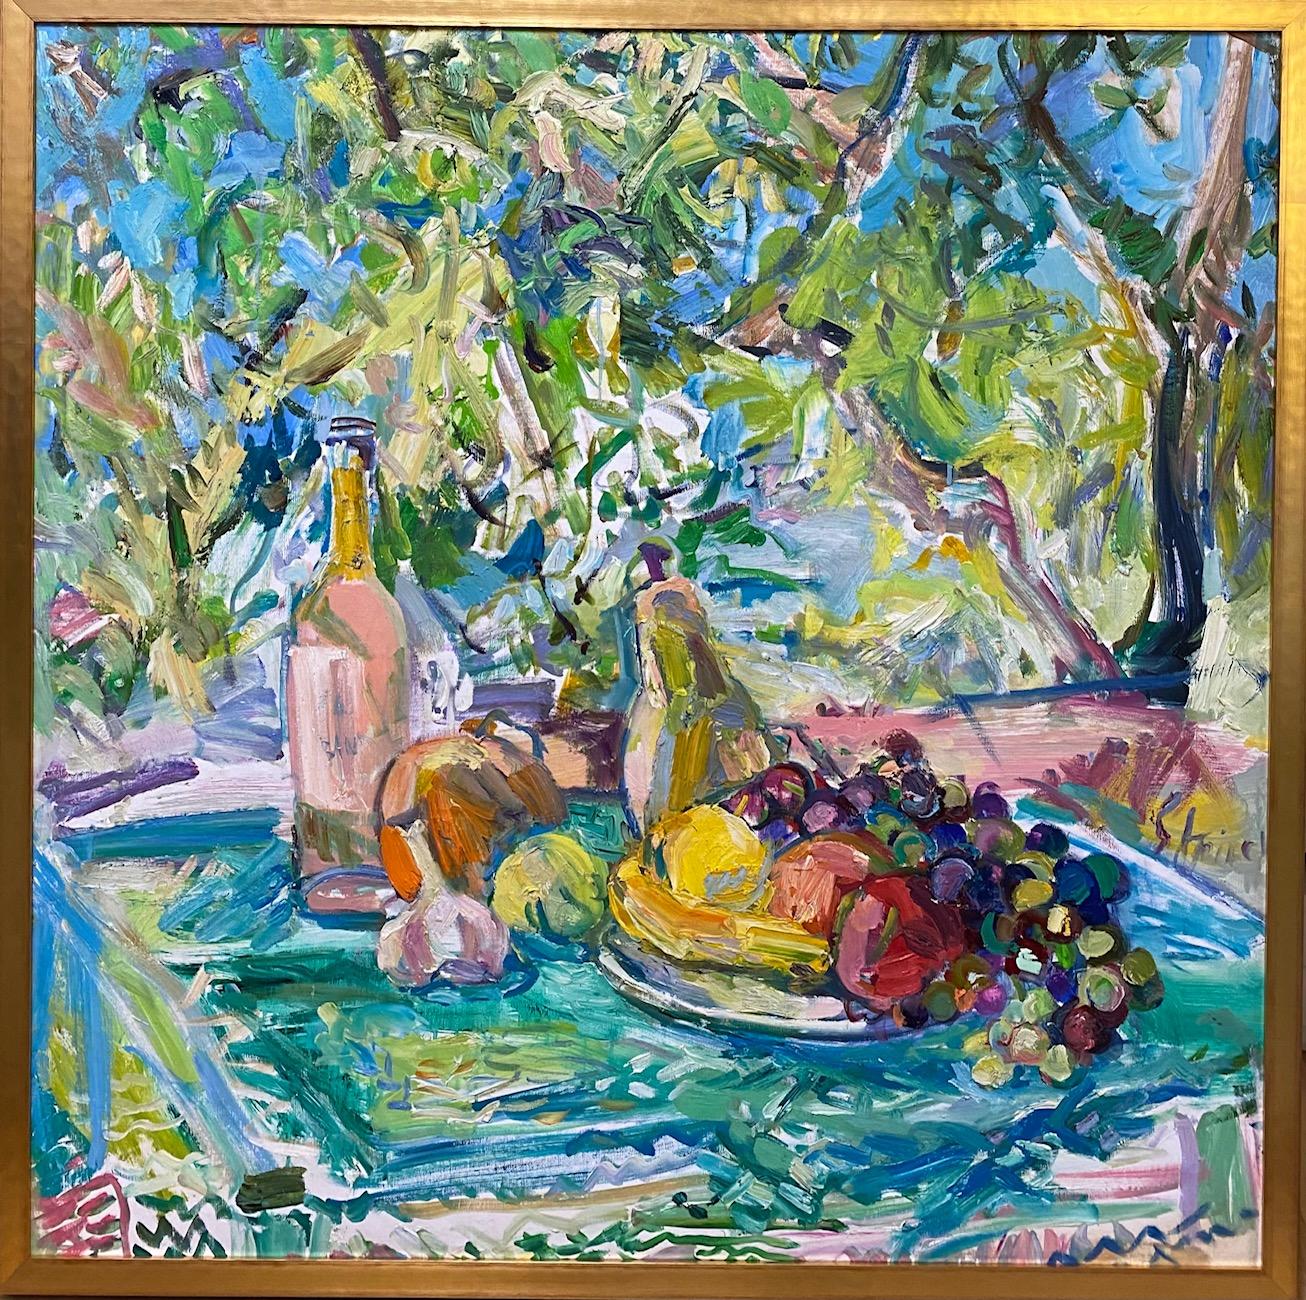 Sonia Grineva Abstract Painting - Afternoon Wine and Fruit, original 38x38 abstract expressionist still life